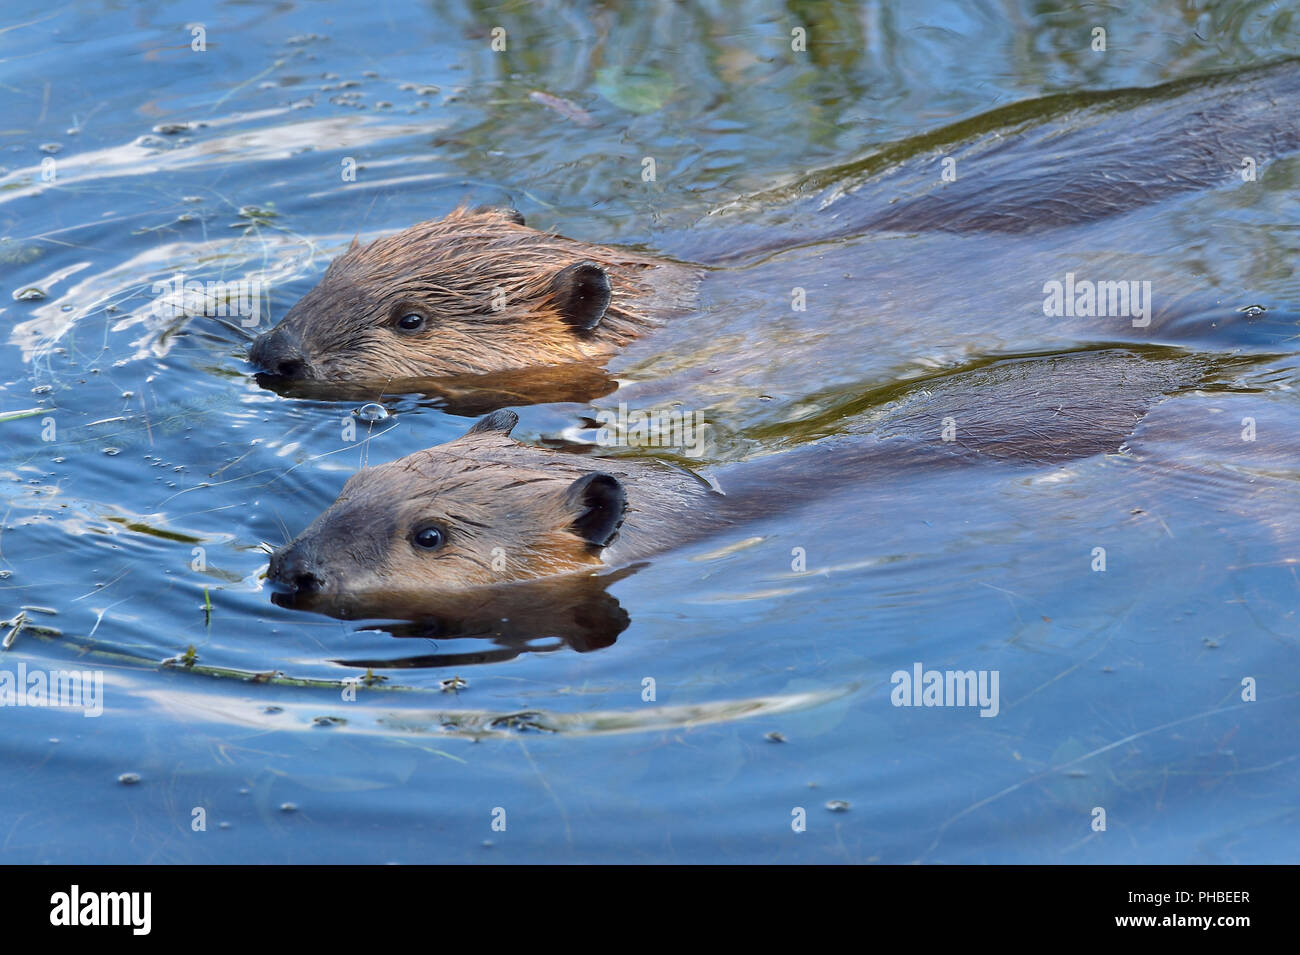 Two adult beavers  'Castor canadenis';  swimming side by side in the water of thier beaver pond in rural Alberta Canada Stock Photo